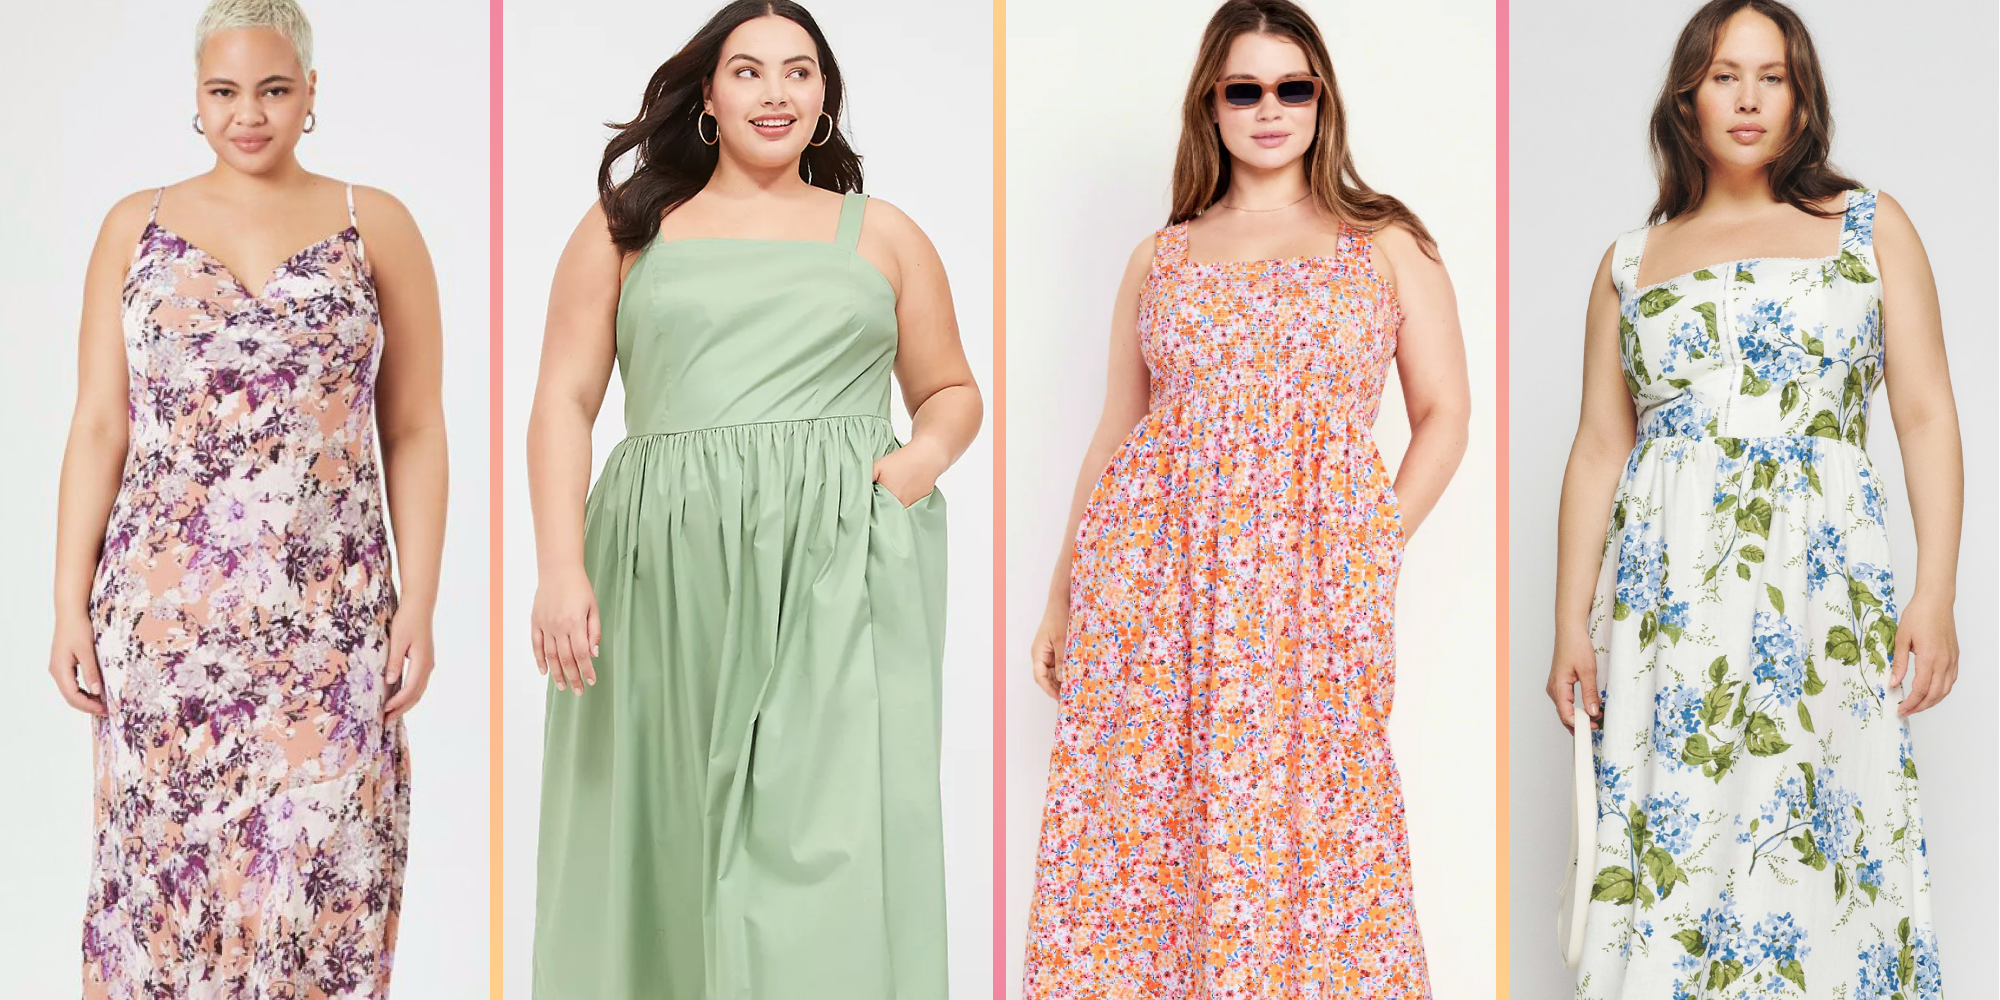 12 Beautiful Easter Dresses Under $50 at